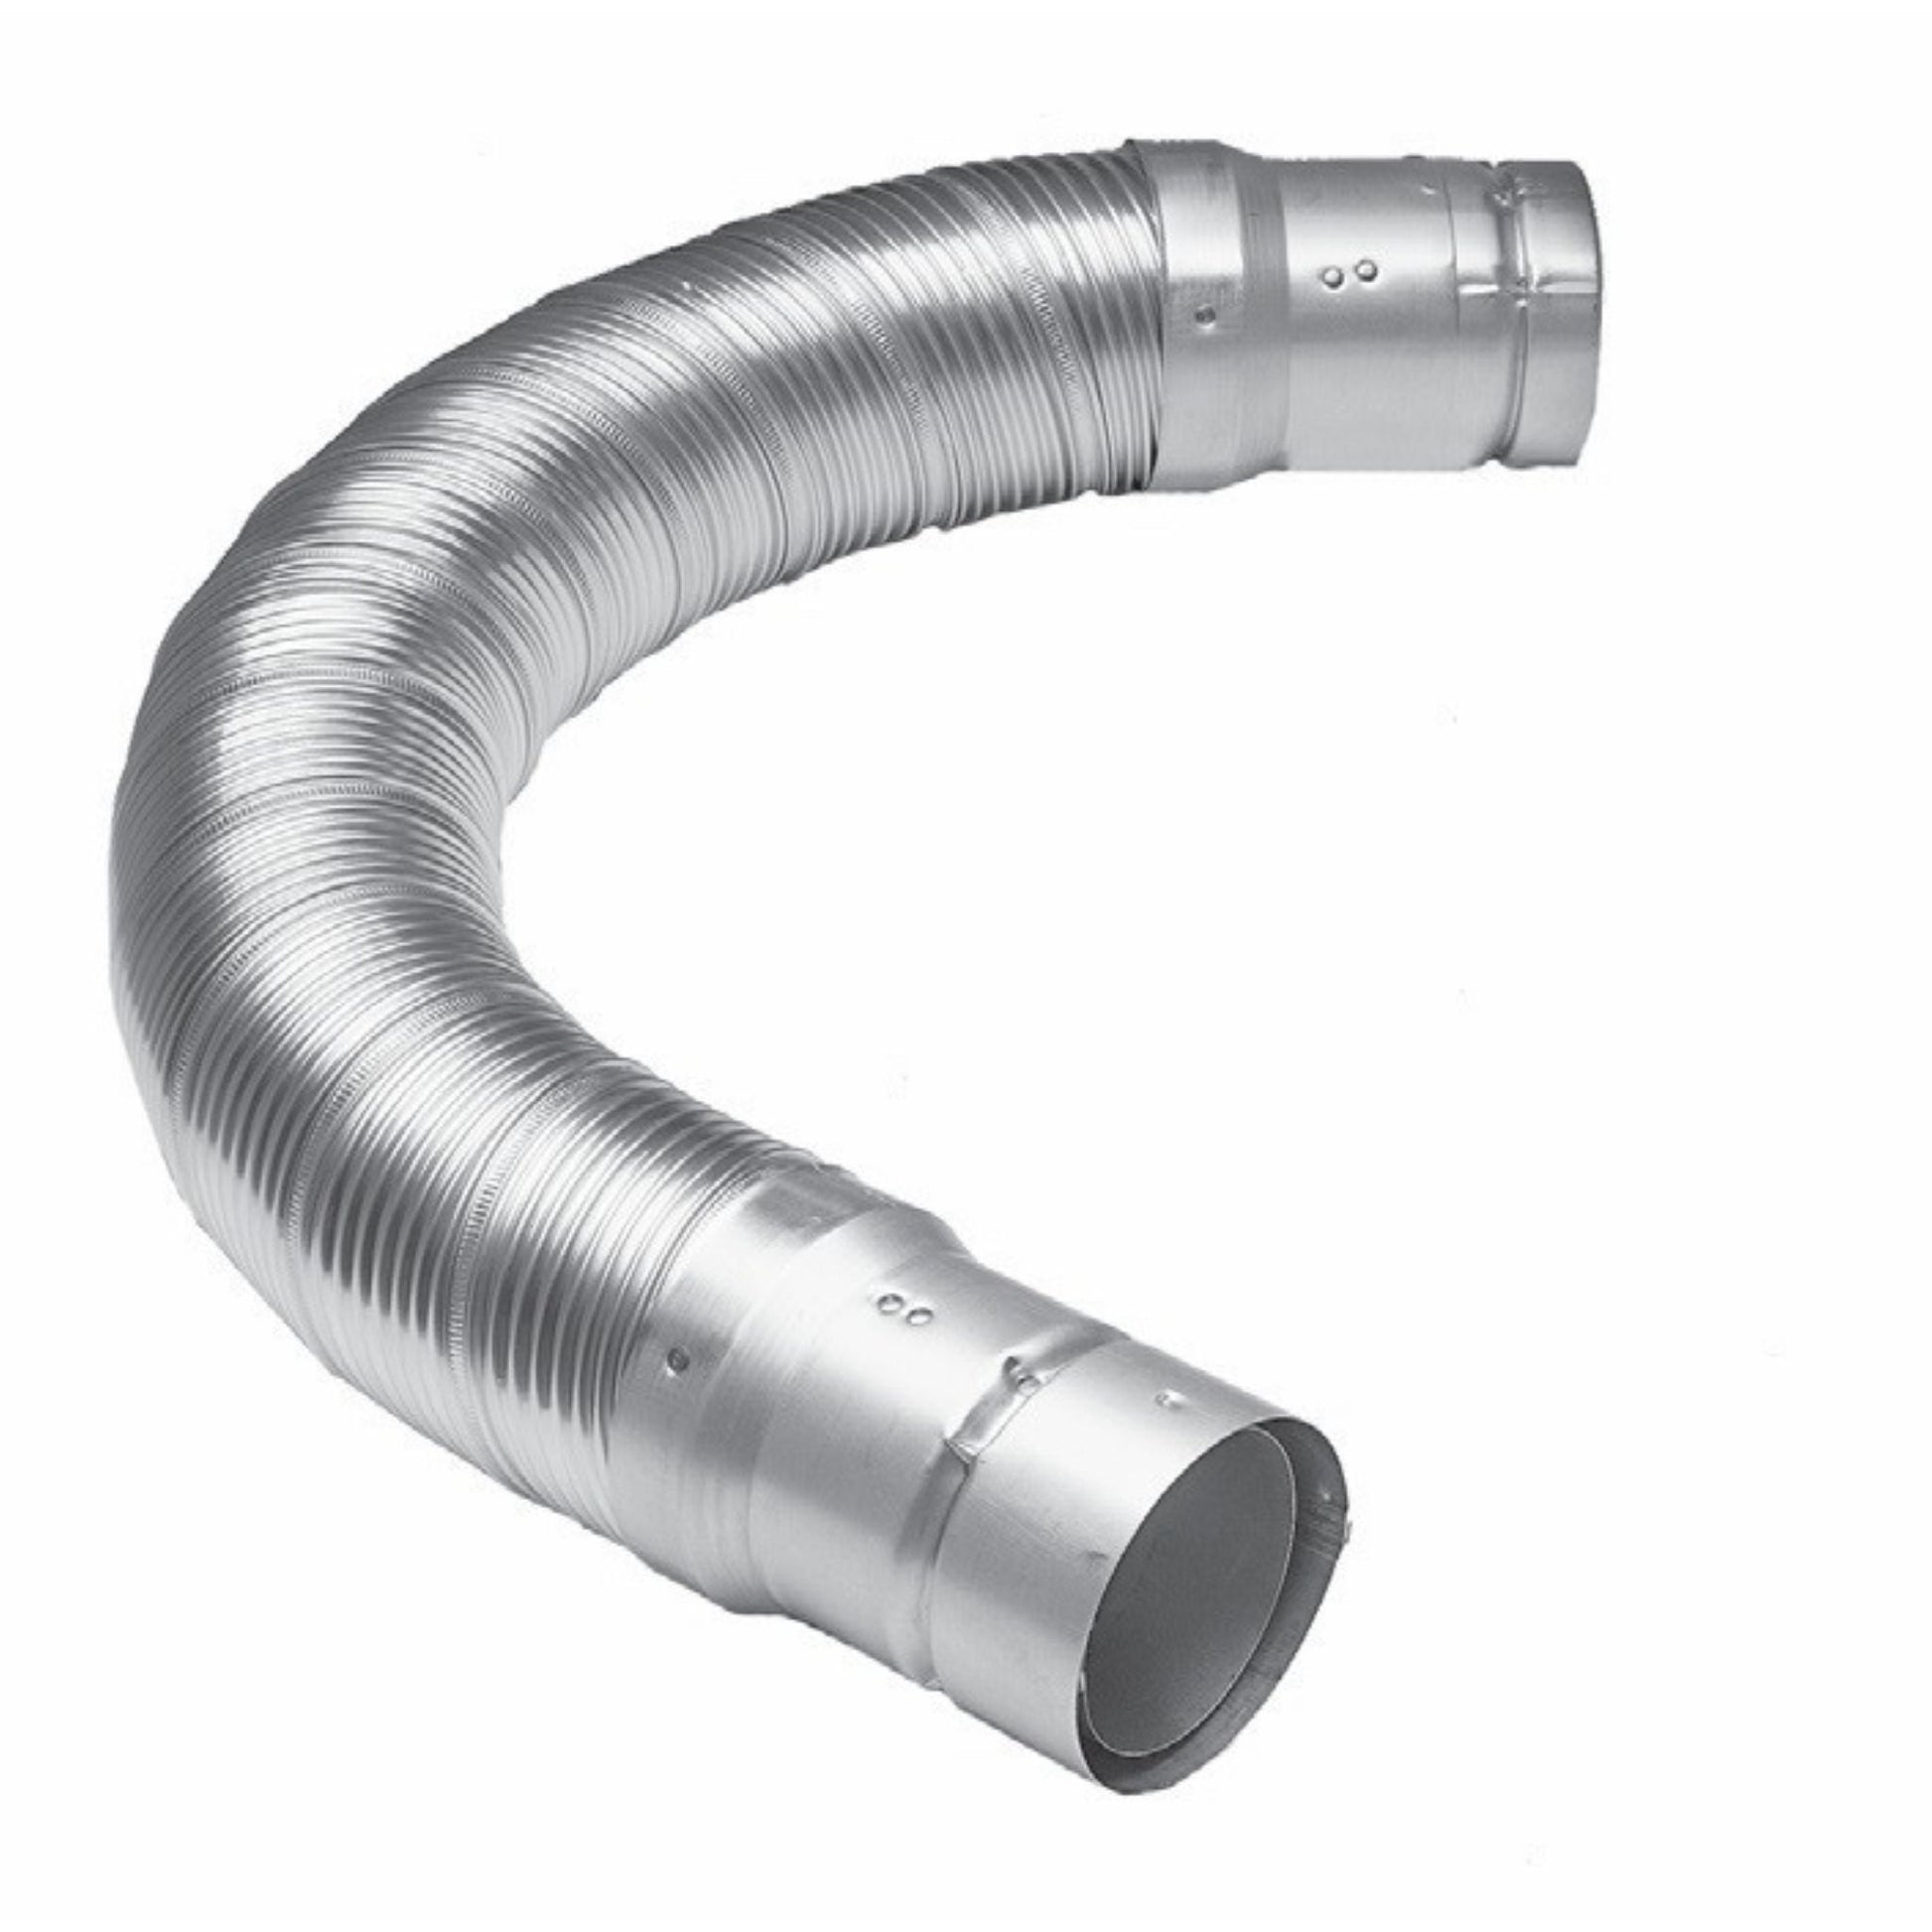 DuraVent DuraConnect II B-Vent 5" x 36" Flexible Double-Wall Gas Vent Connector